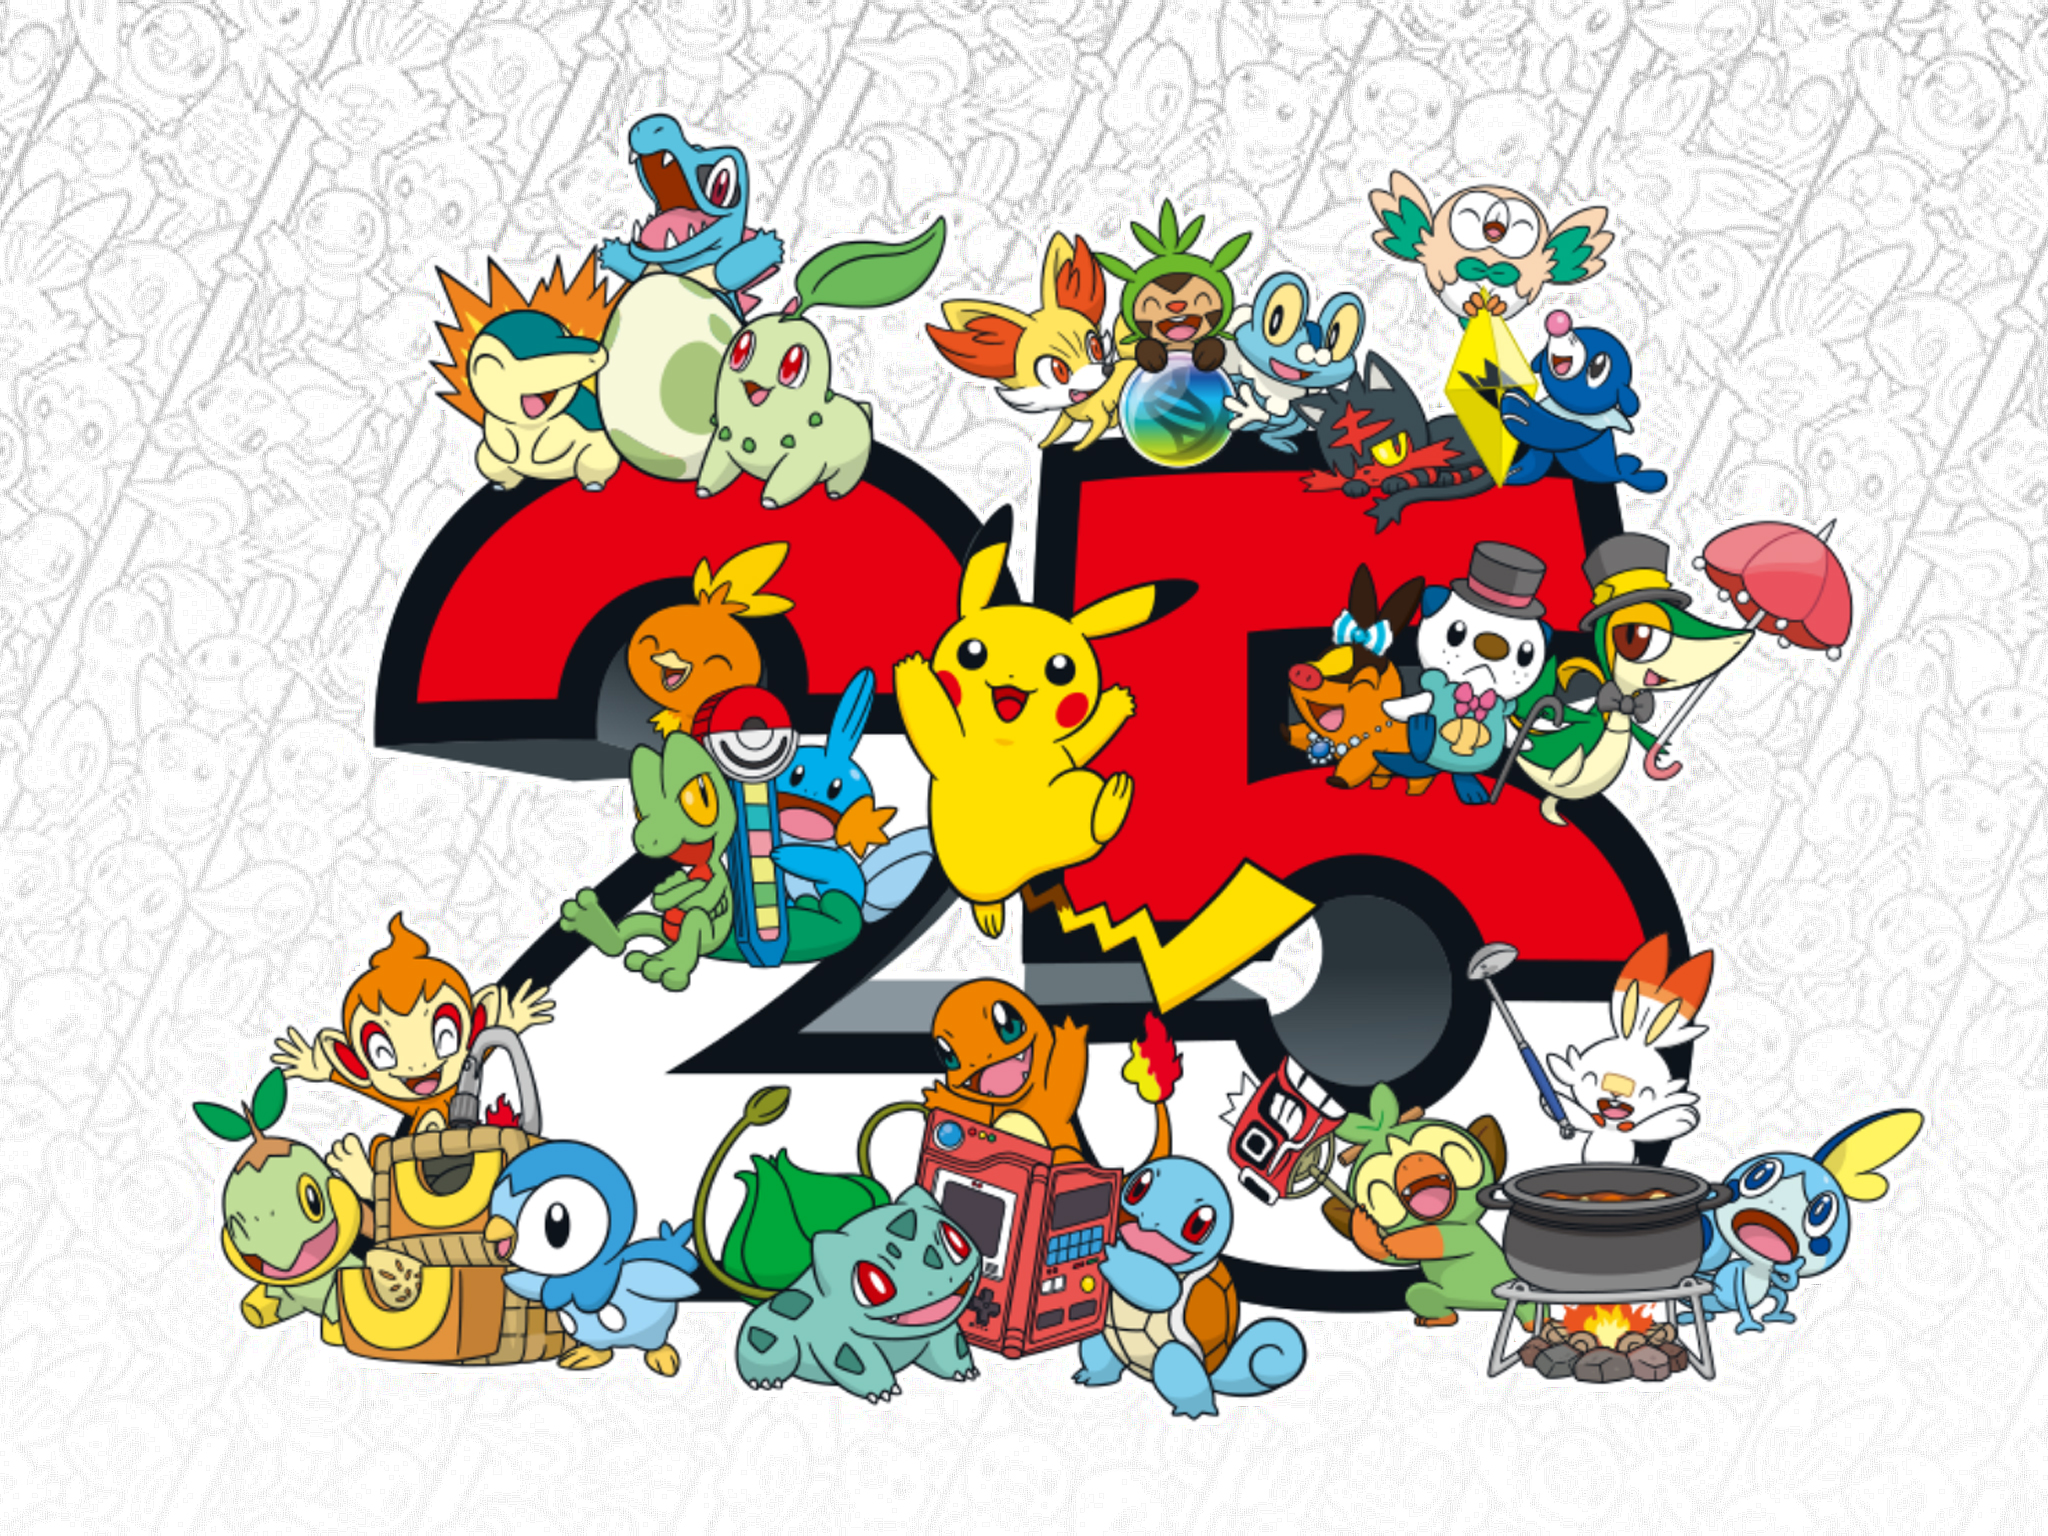 Pokemon's Anime Is Gearing Up for a Big Anniversary This Year